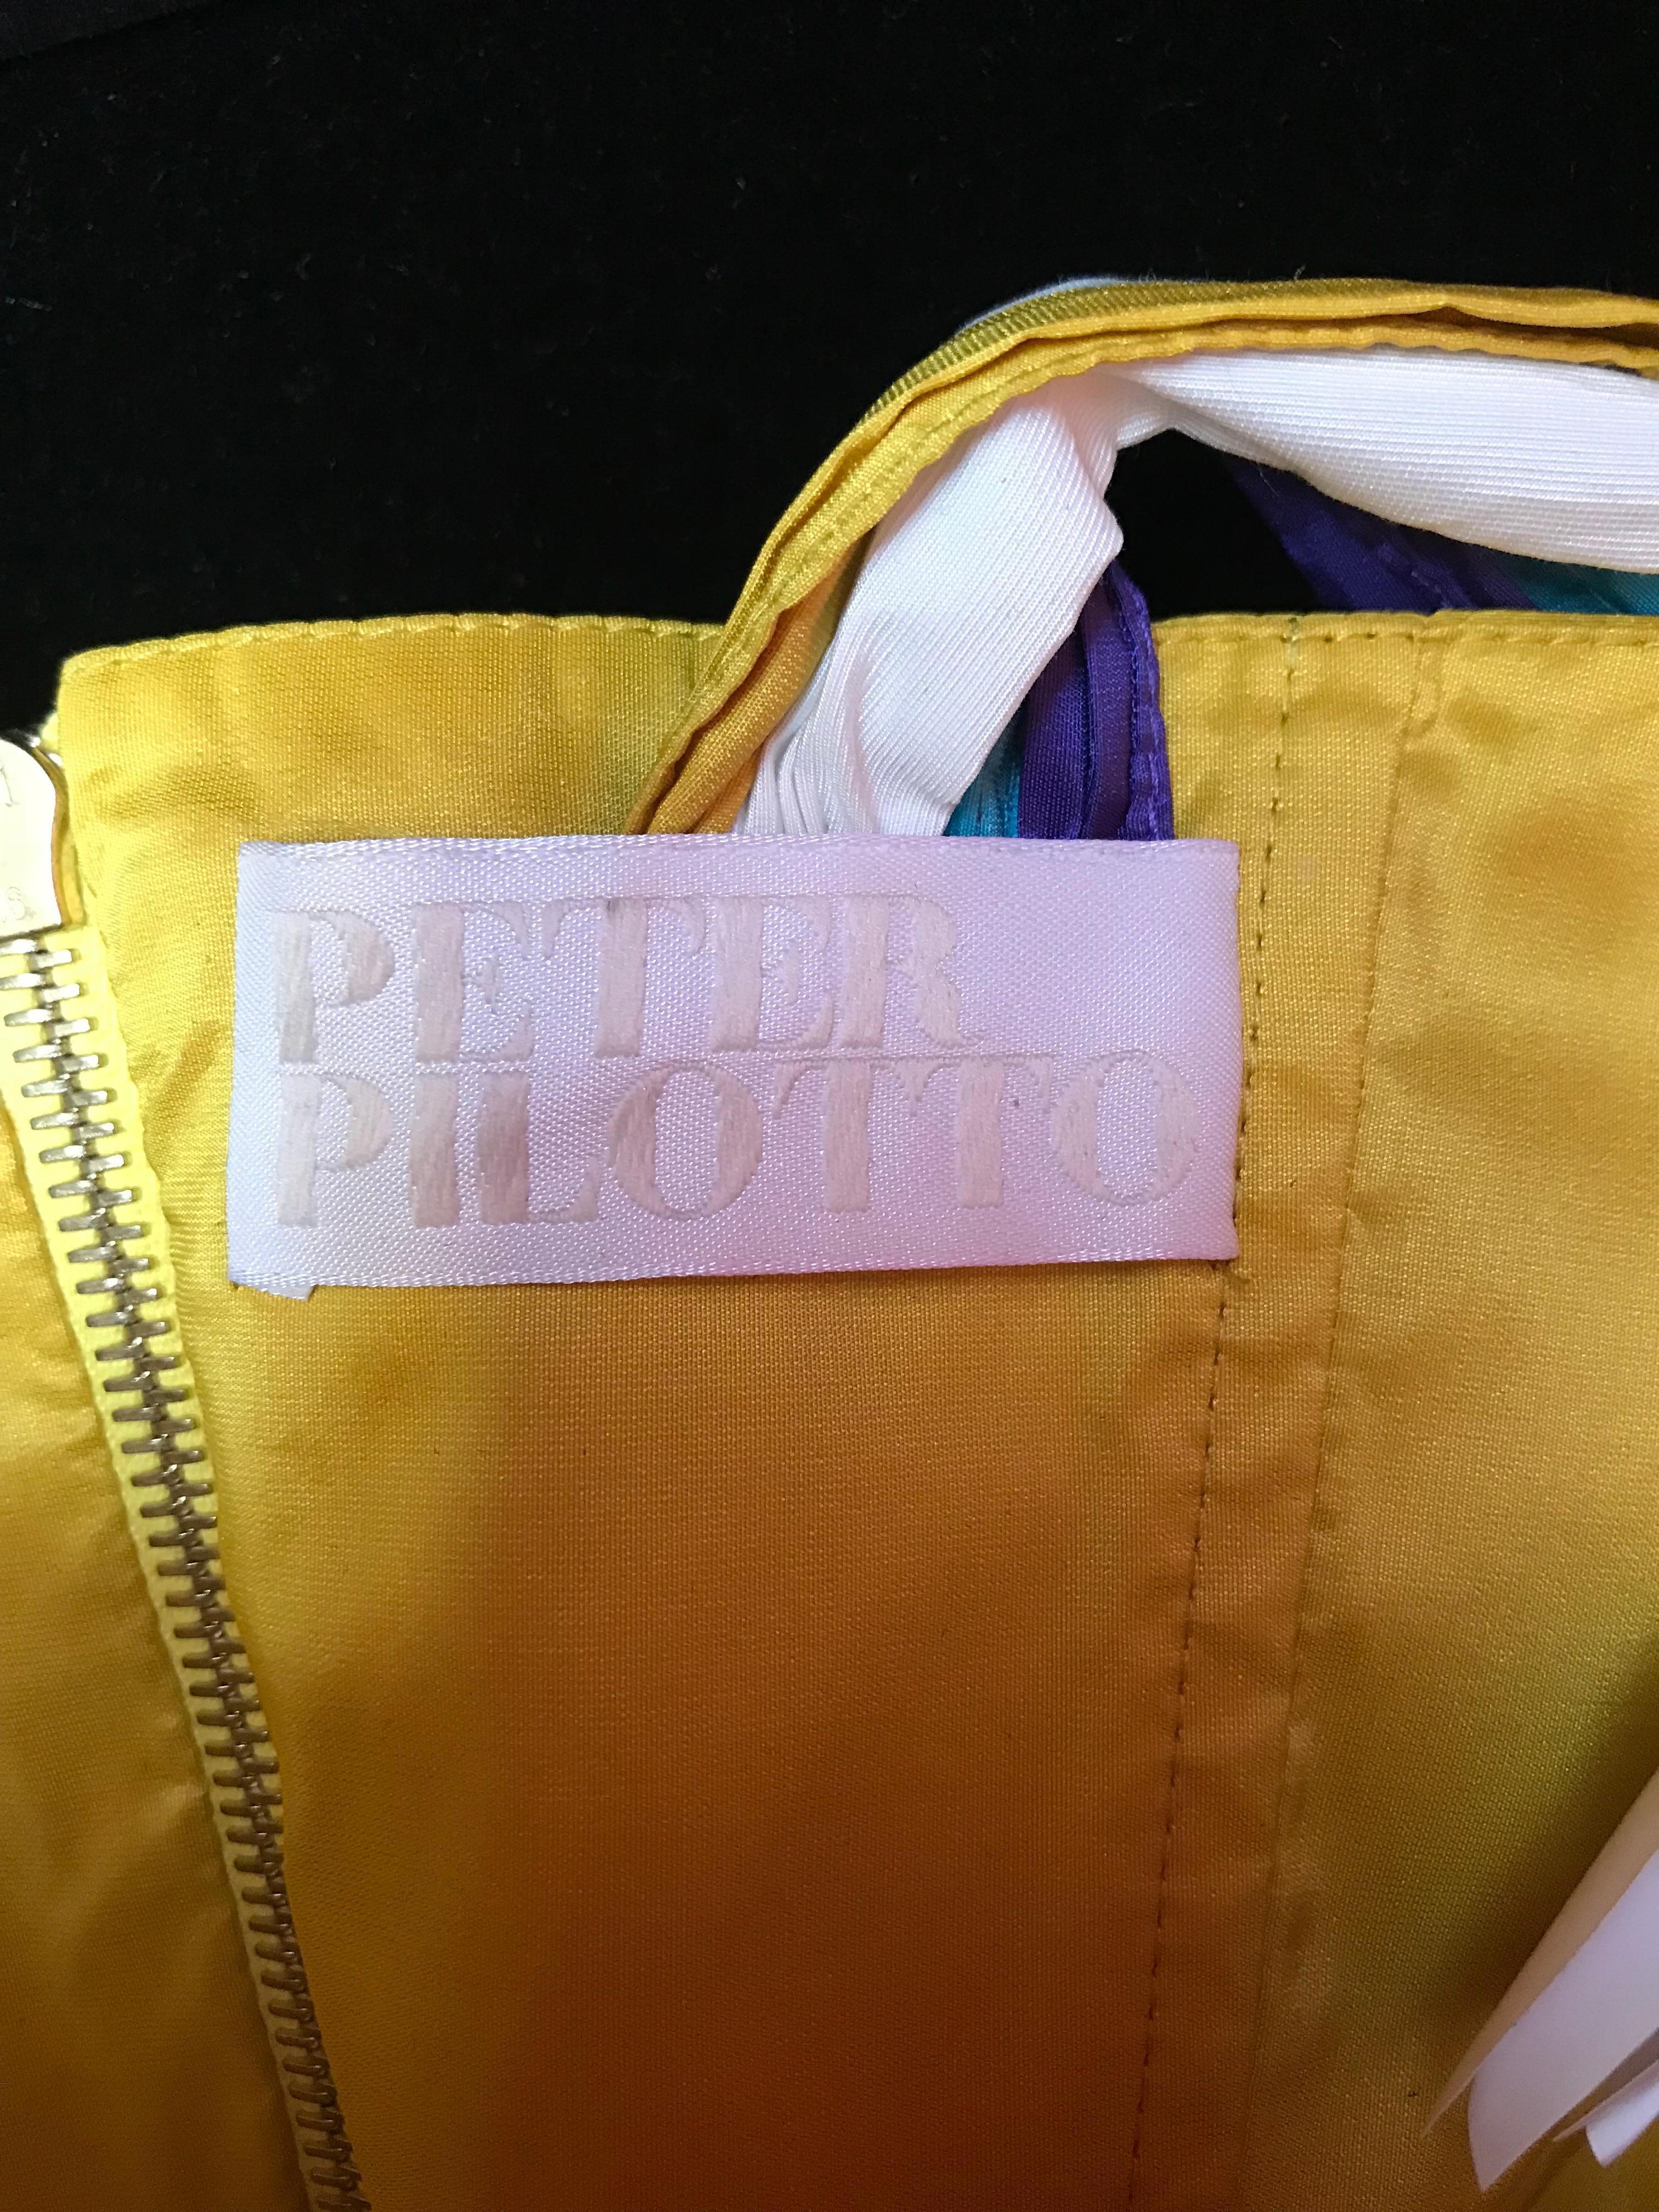 Peter Pilotto Yellow Taffeta Crop Top with Purple Ballroom Skirt Size 4 In Excellent Condition For Sale In Thousand Oaks, CA